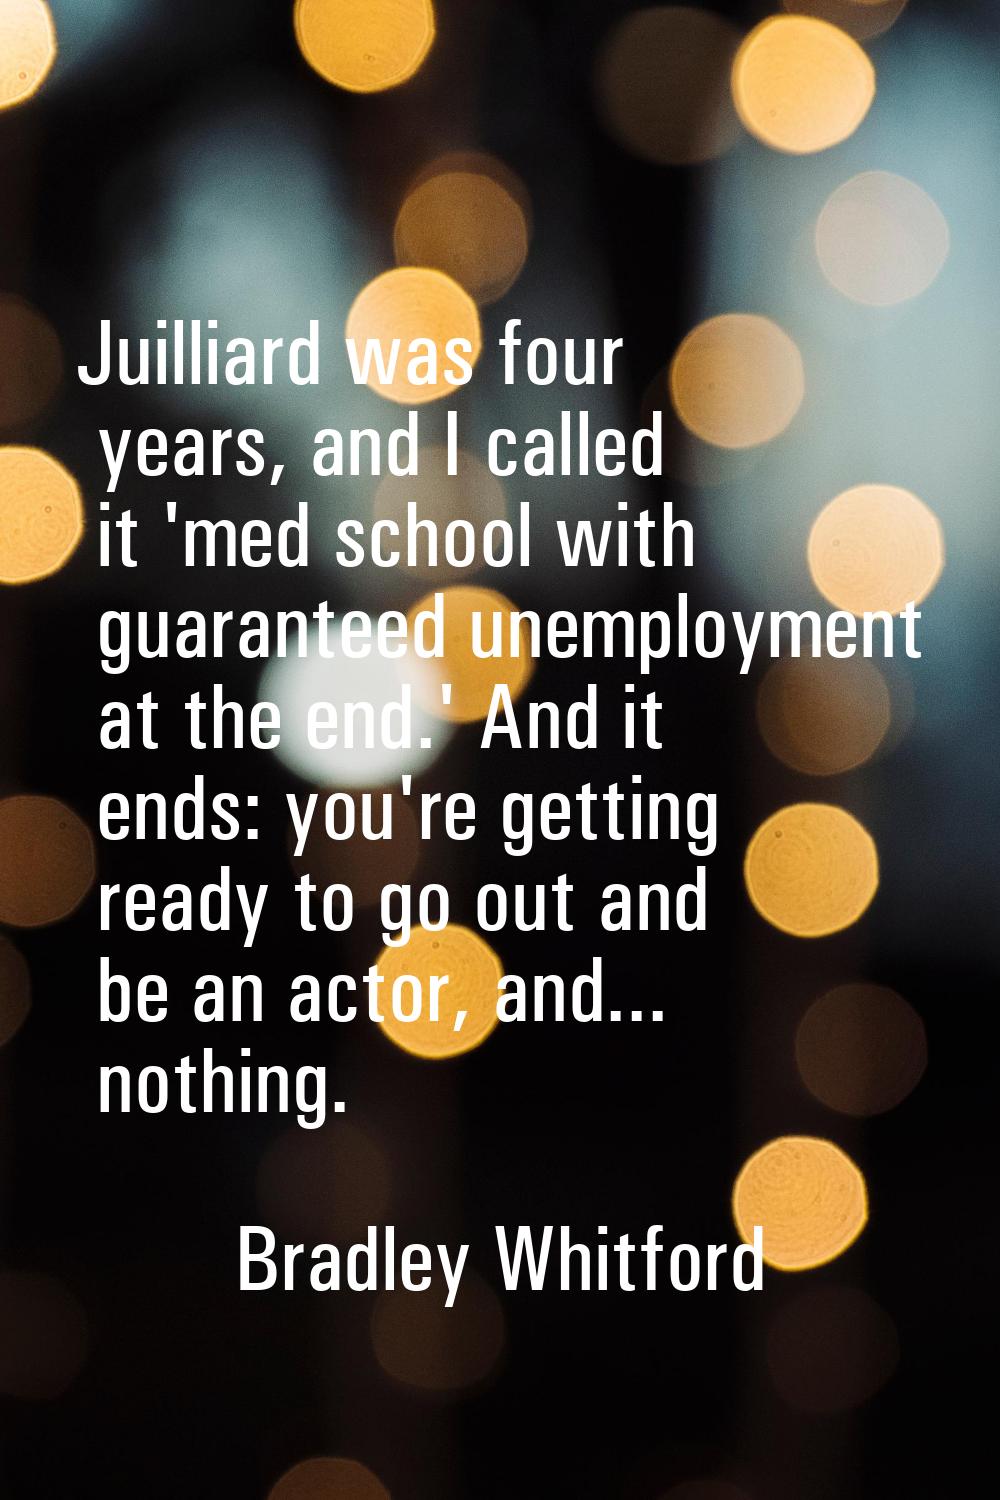 Juilliard was four years, and I called it 'med school with guaranteed unemployment at the end.' And